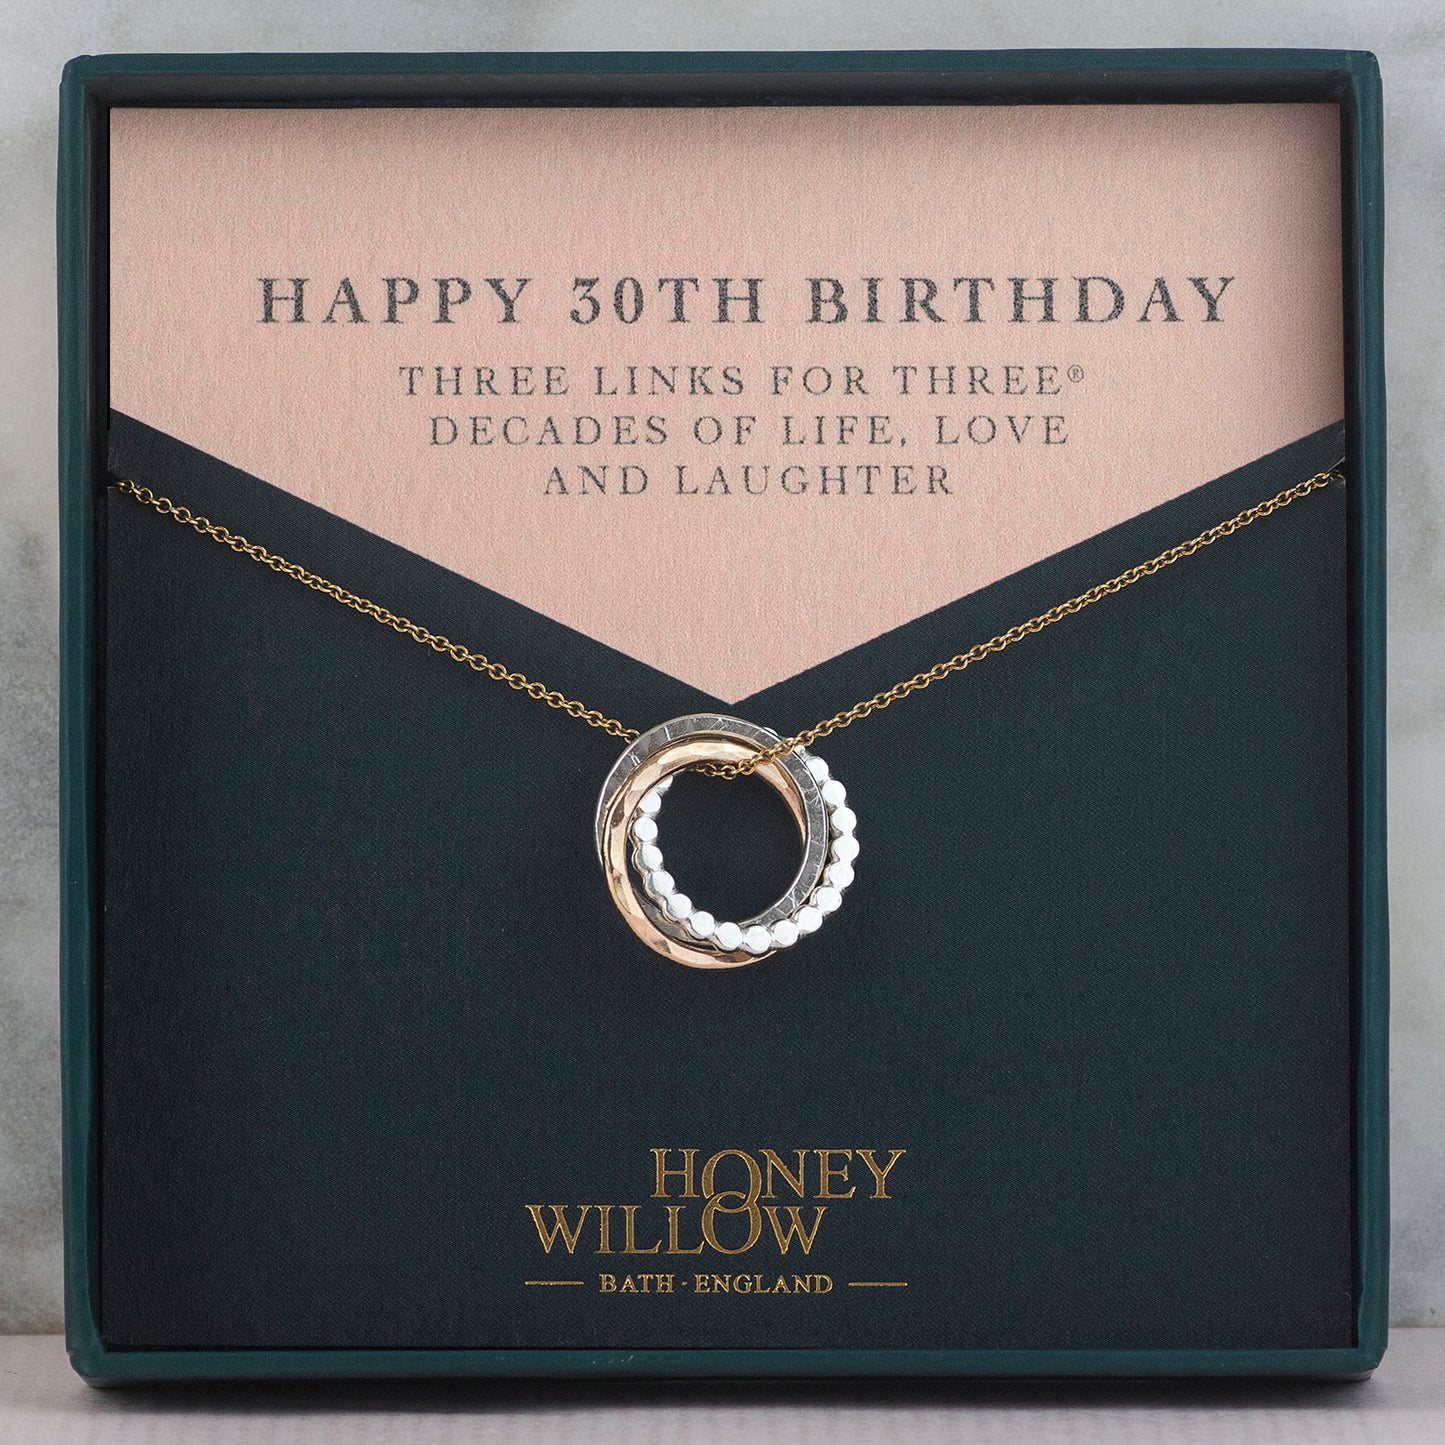 30th Birthday Necklace - The Original 3 Links for 3 Decades Necklace - Silver & Gold